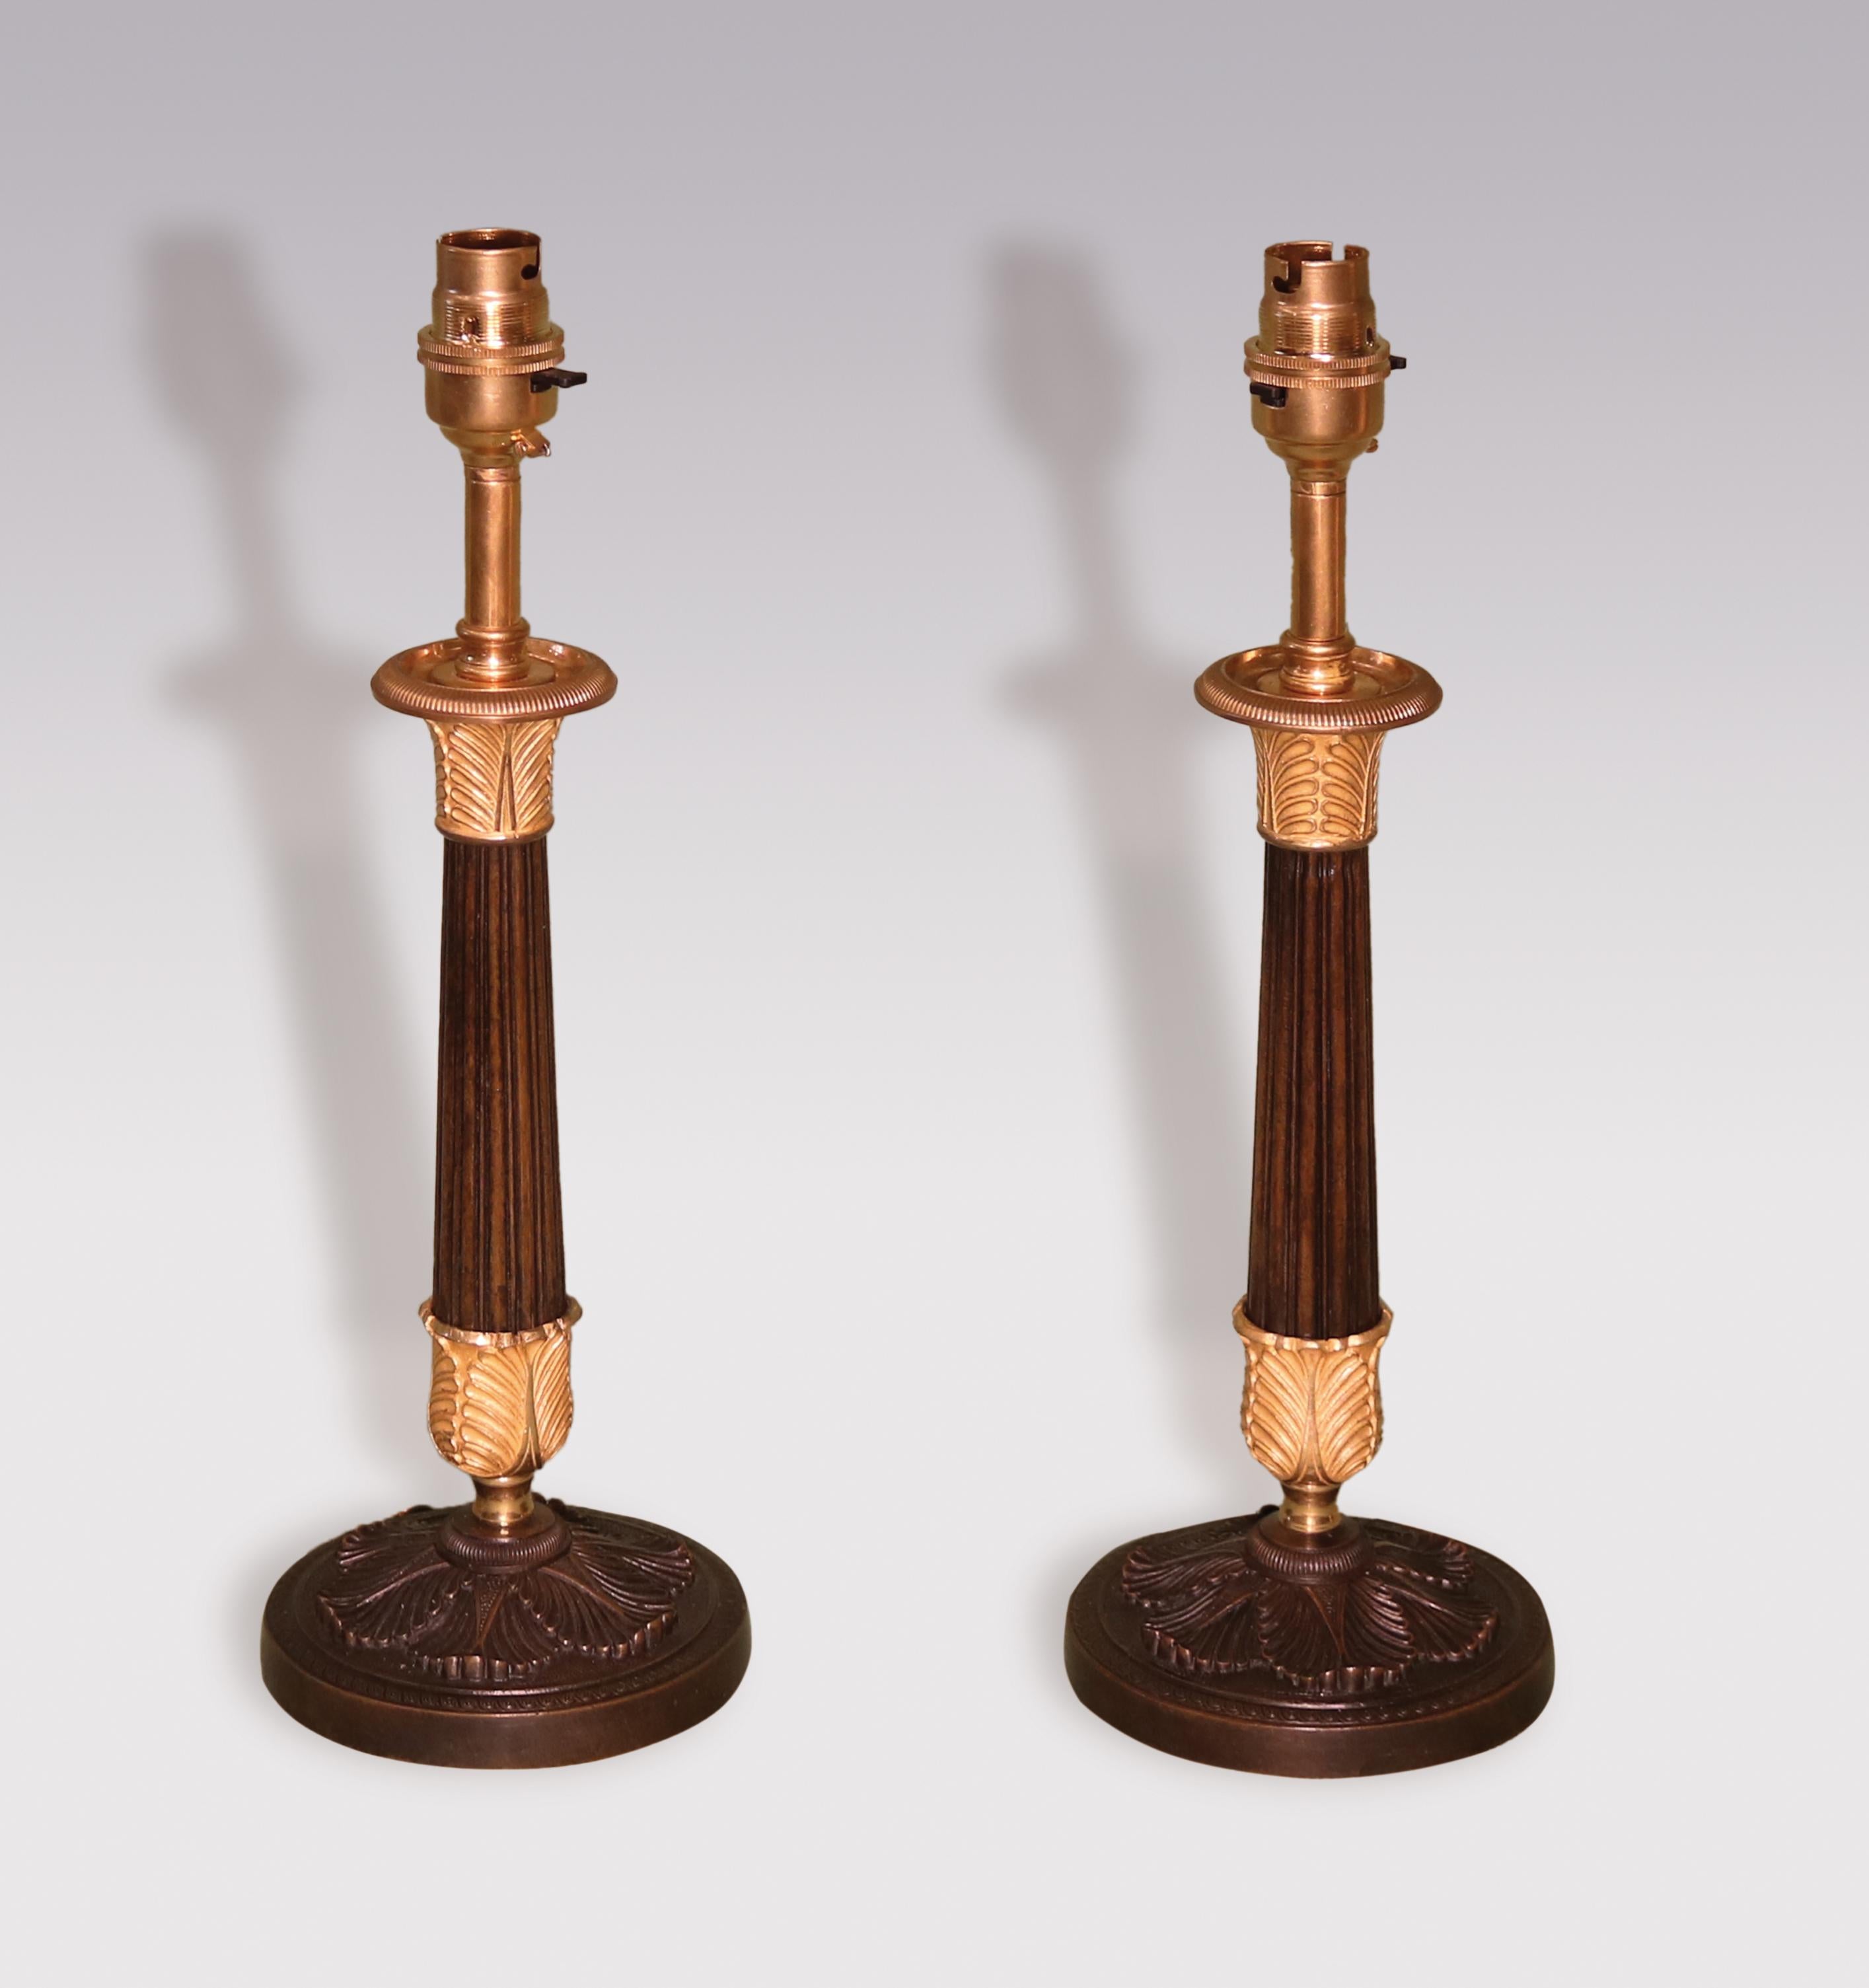 A pair of early 19th century bronze & ormolu candlesticks, having acanthus leaf sconces above reeded tapering stems supported on well-cast acanthus leaf circular bases. (Now converted to lamps)
Height of candlesticks 10